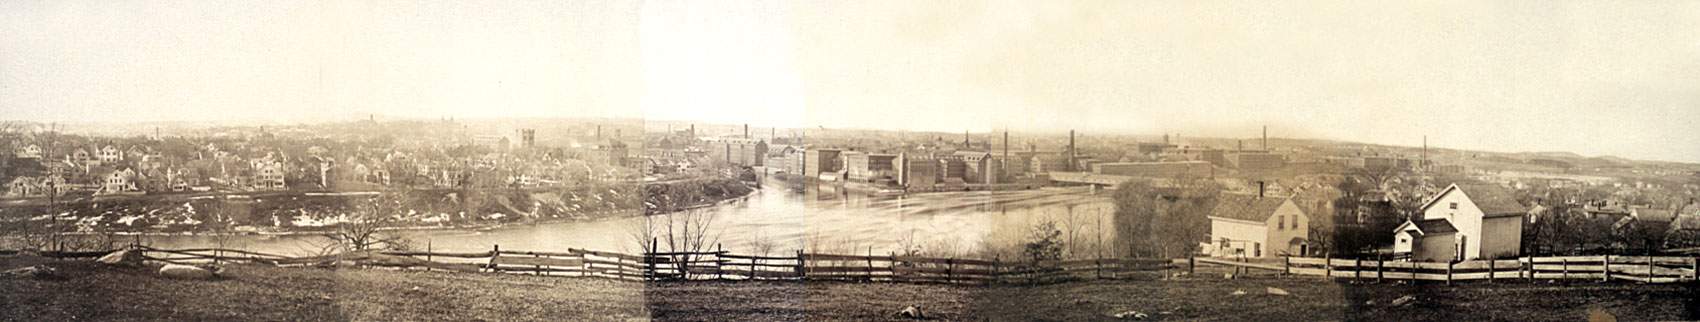 Lowell, Massachusetts, from the northeast, circa 1874, panoramic photograph, zoomable image